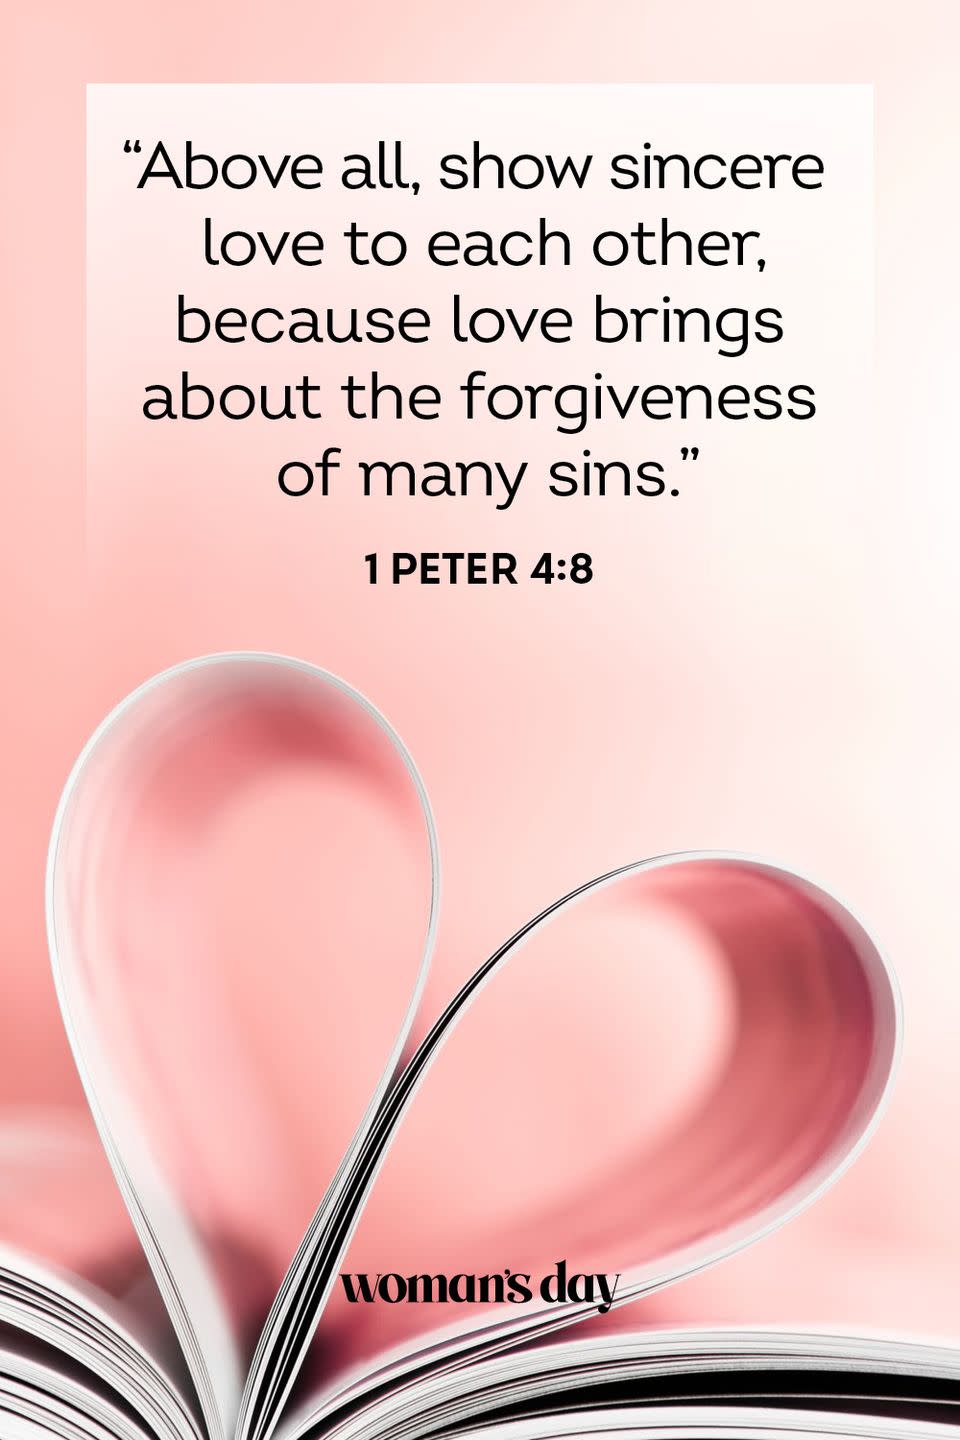 <p>"Above all, show sincere love to each other, because love brings about the forgiveness of many sins."</p><p><strong>The Good News: </strong>We all sin — it happens. However, love wins in the battle of evil, so in everything you do, act with love. Then, you will live a gracious and faithful life.</p>